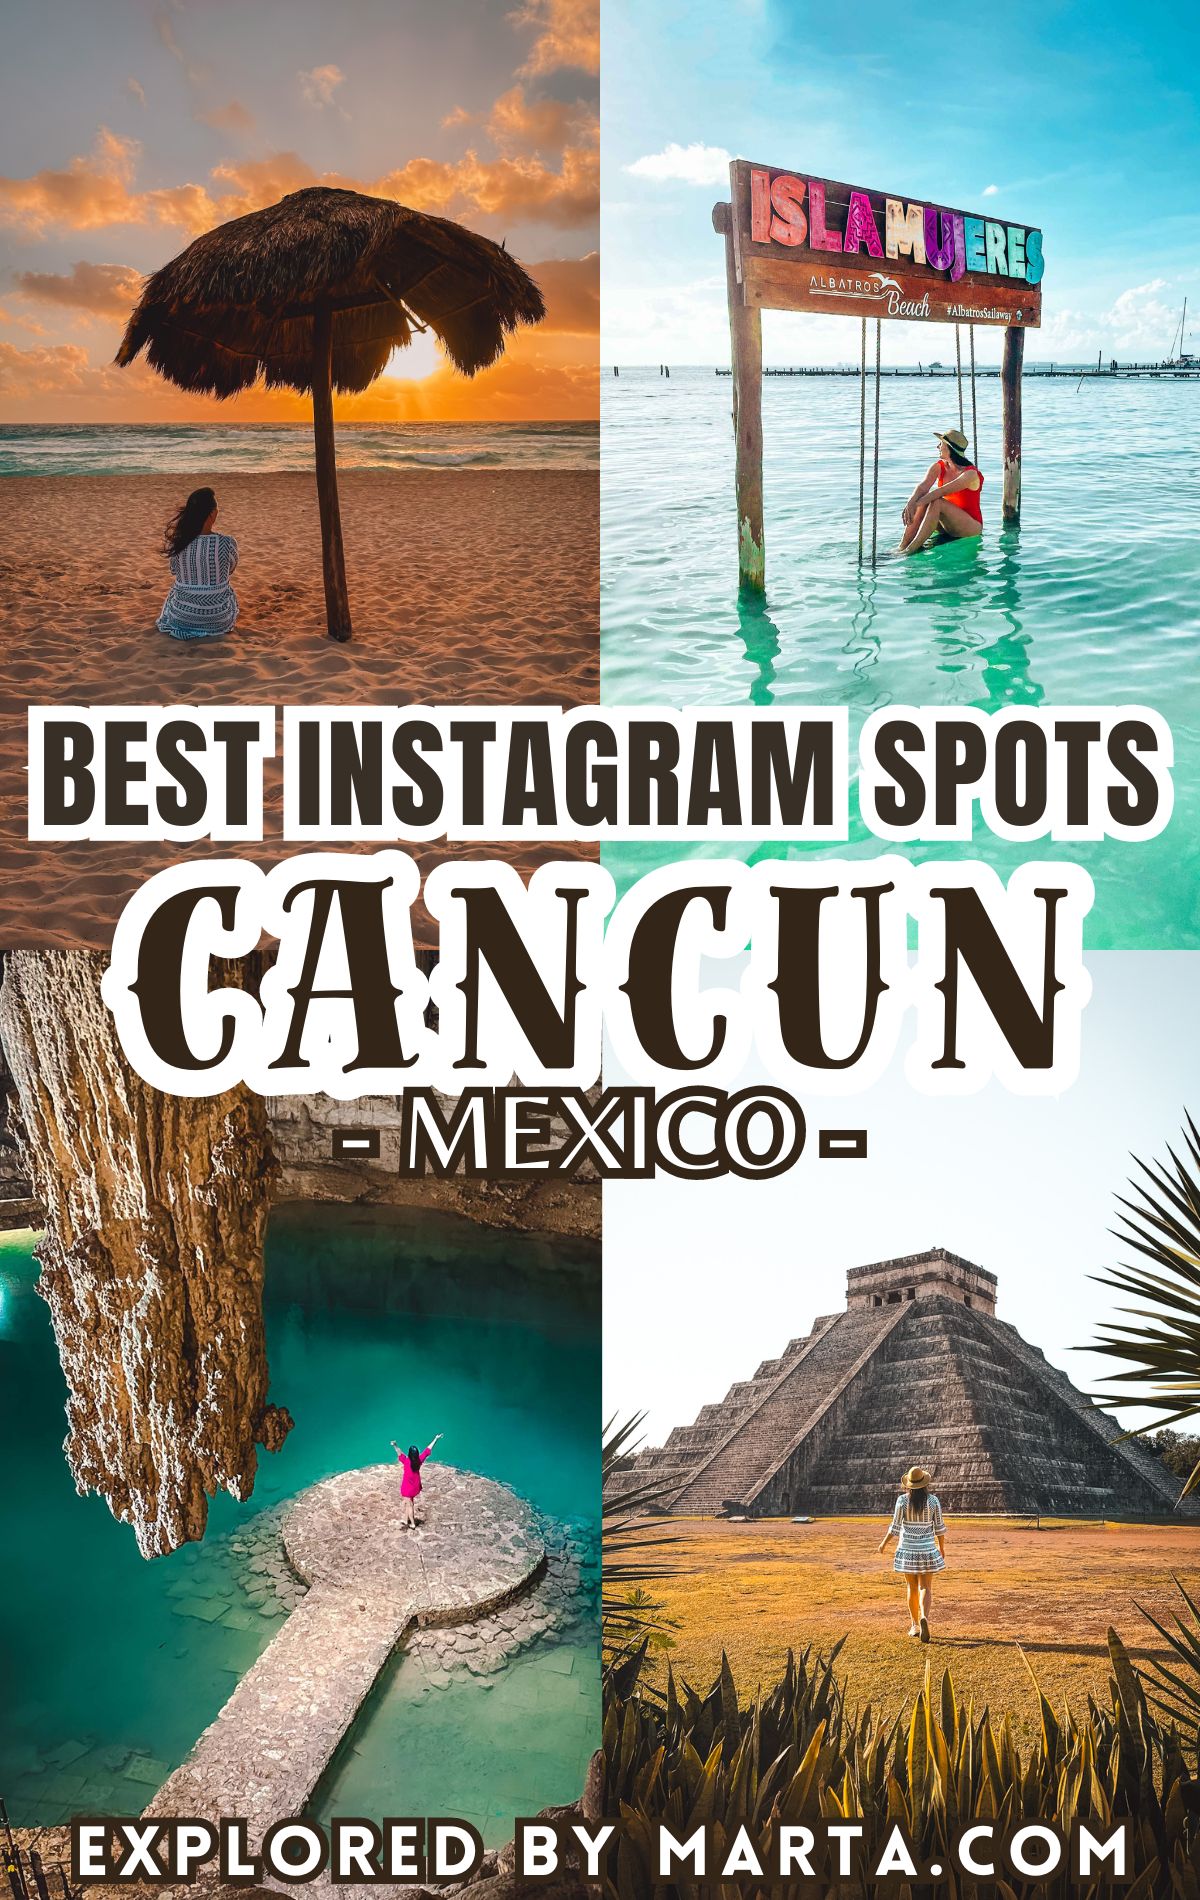 Most amazing Instagram spots in Cancun, Mexico